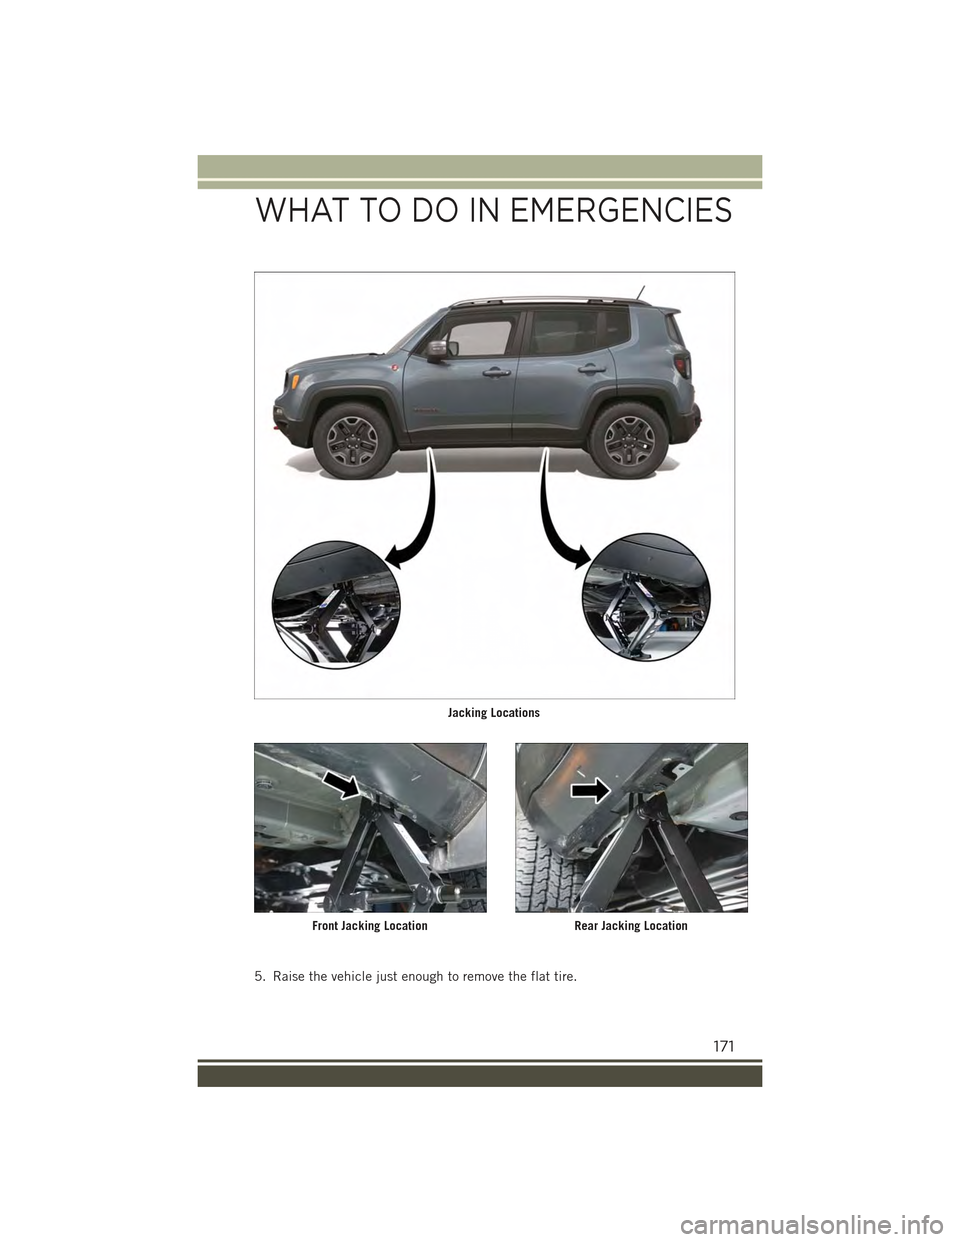 JEEP RENEGADE 2015 1.G User Guide 5. Raise the vehicle just enough to remove the flat tire.
Jacking Locations
Front Jacking LocationRear Jacking Location
WHAT TO DO IN EMERGENCIES
171 